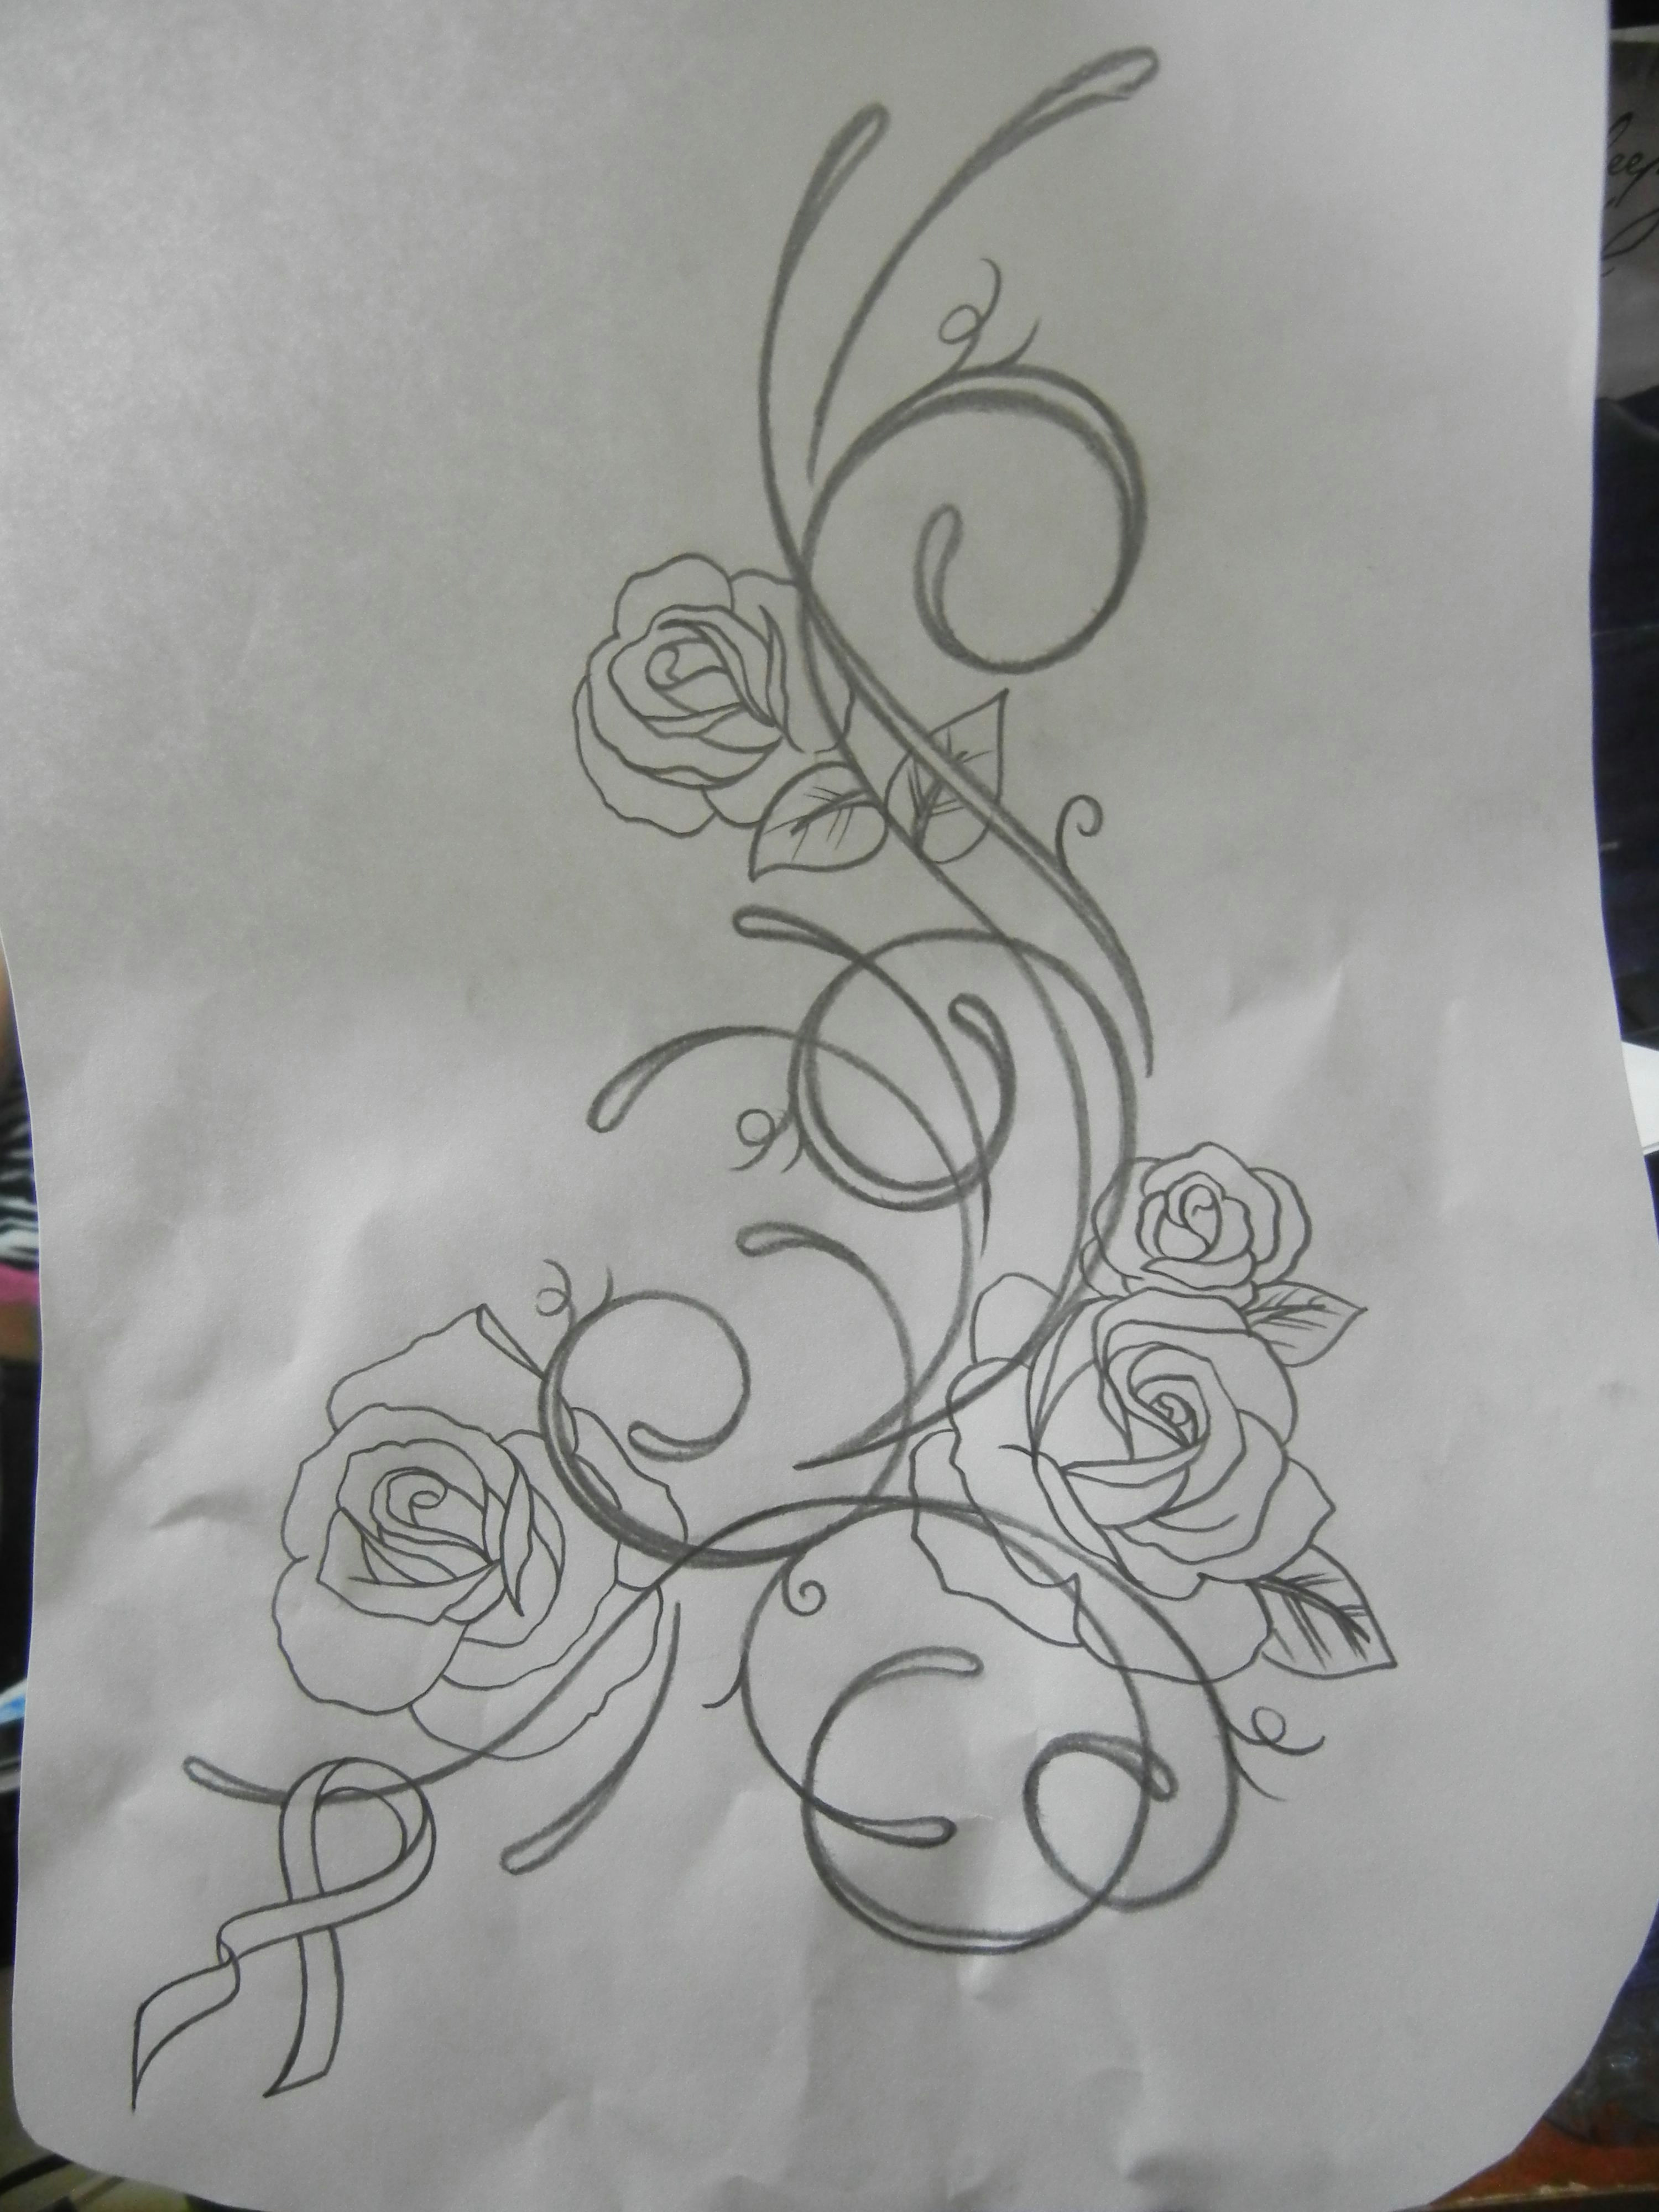 tattoo i m hopefully getting soon will be on my left hip n ribs and the roses will be more detailed ribbon will be teal the reason being is because when